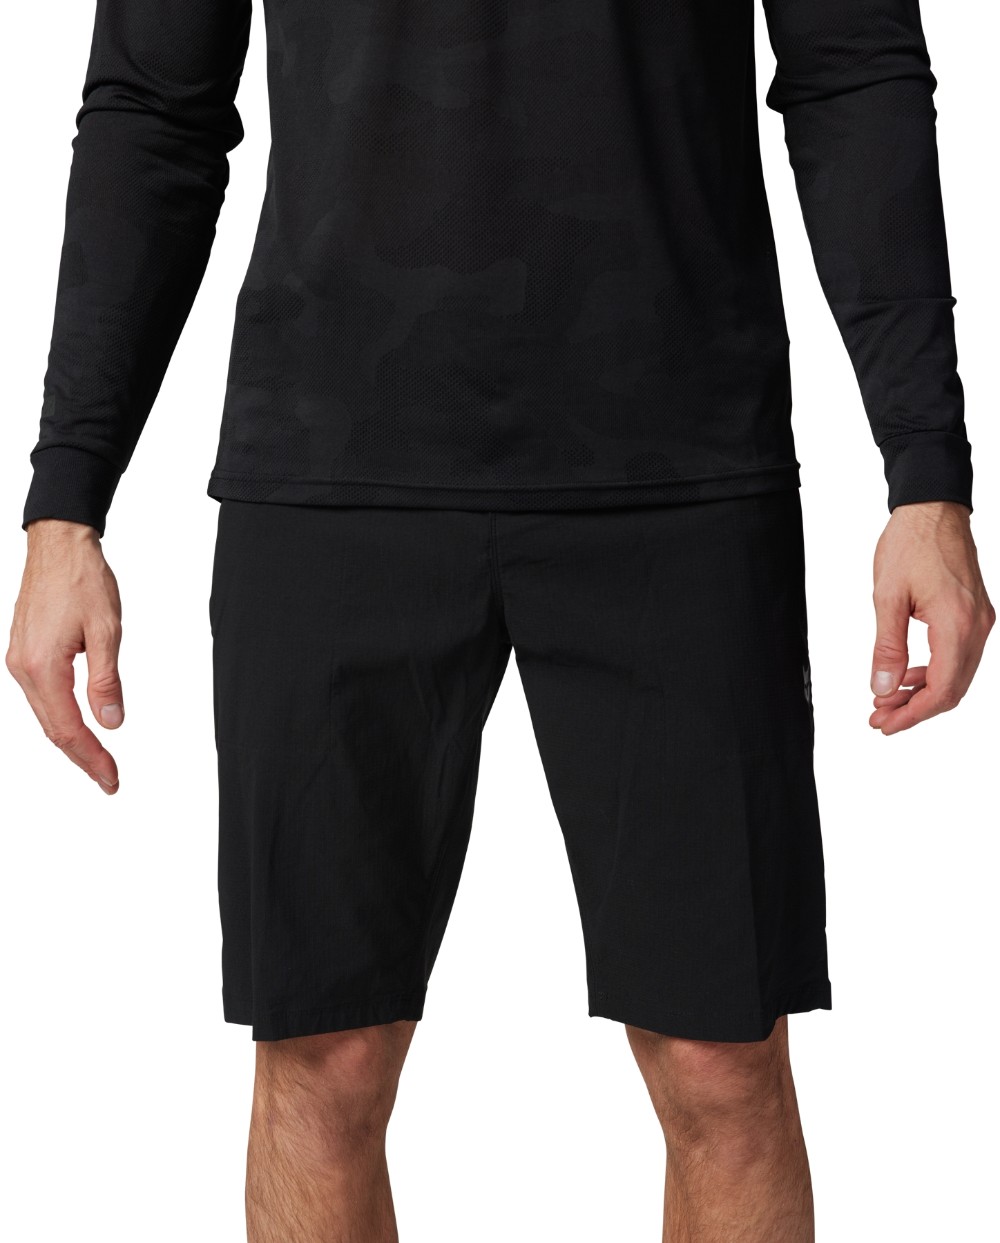 Ranger MTB Shorts with Liner image 0